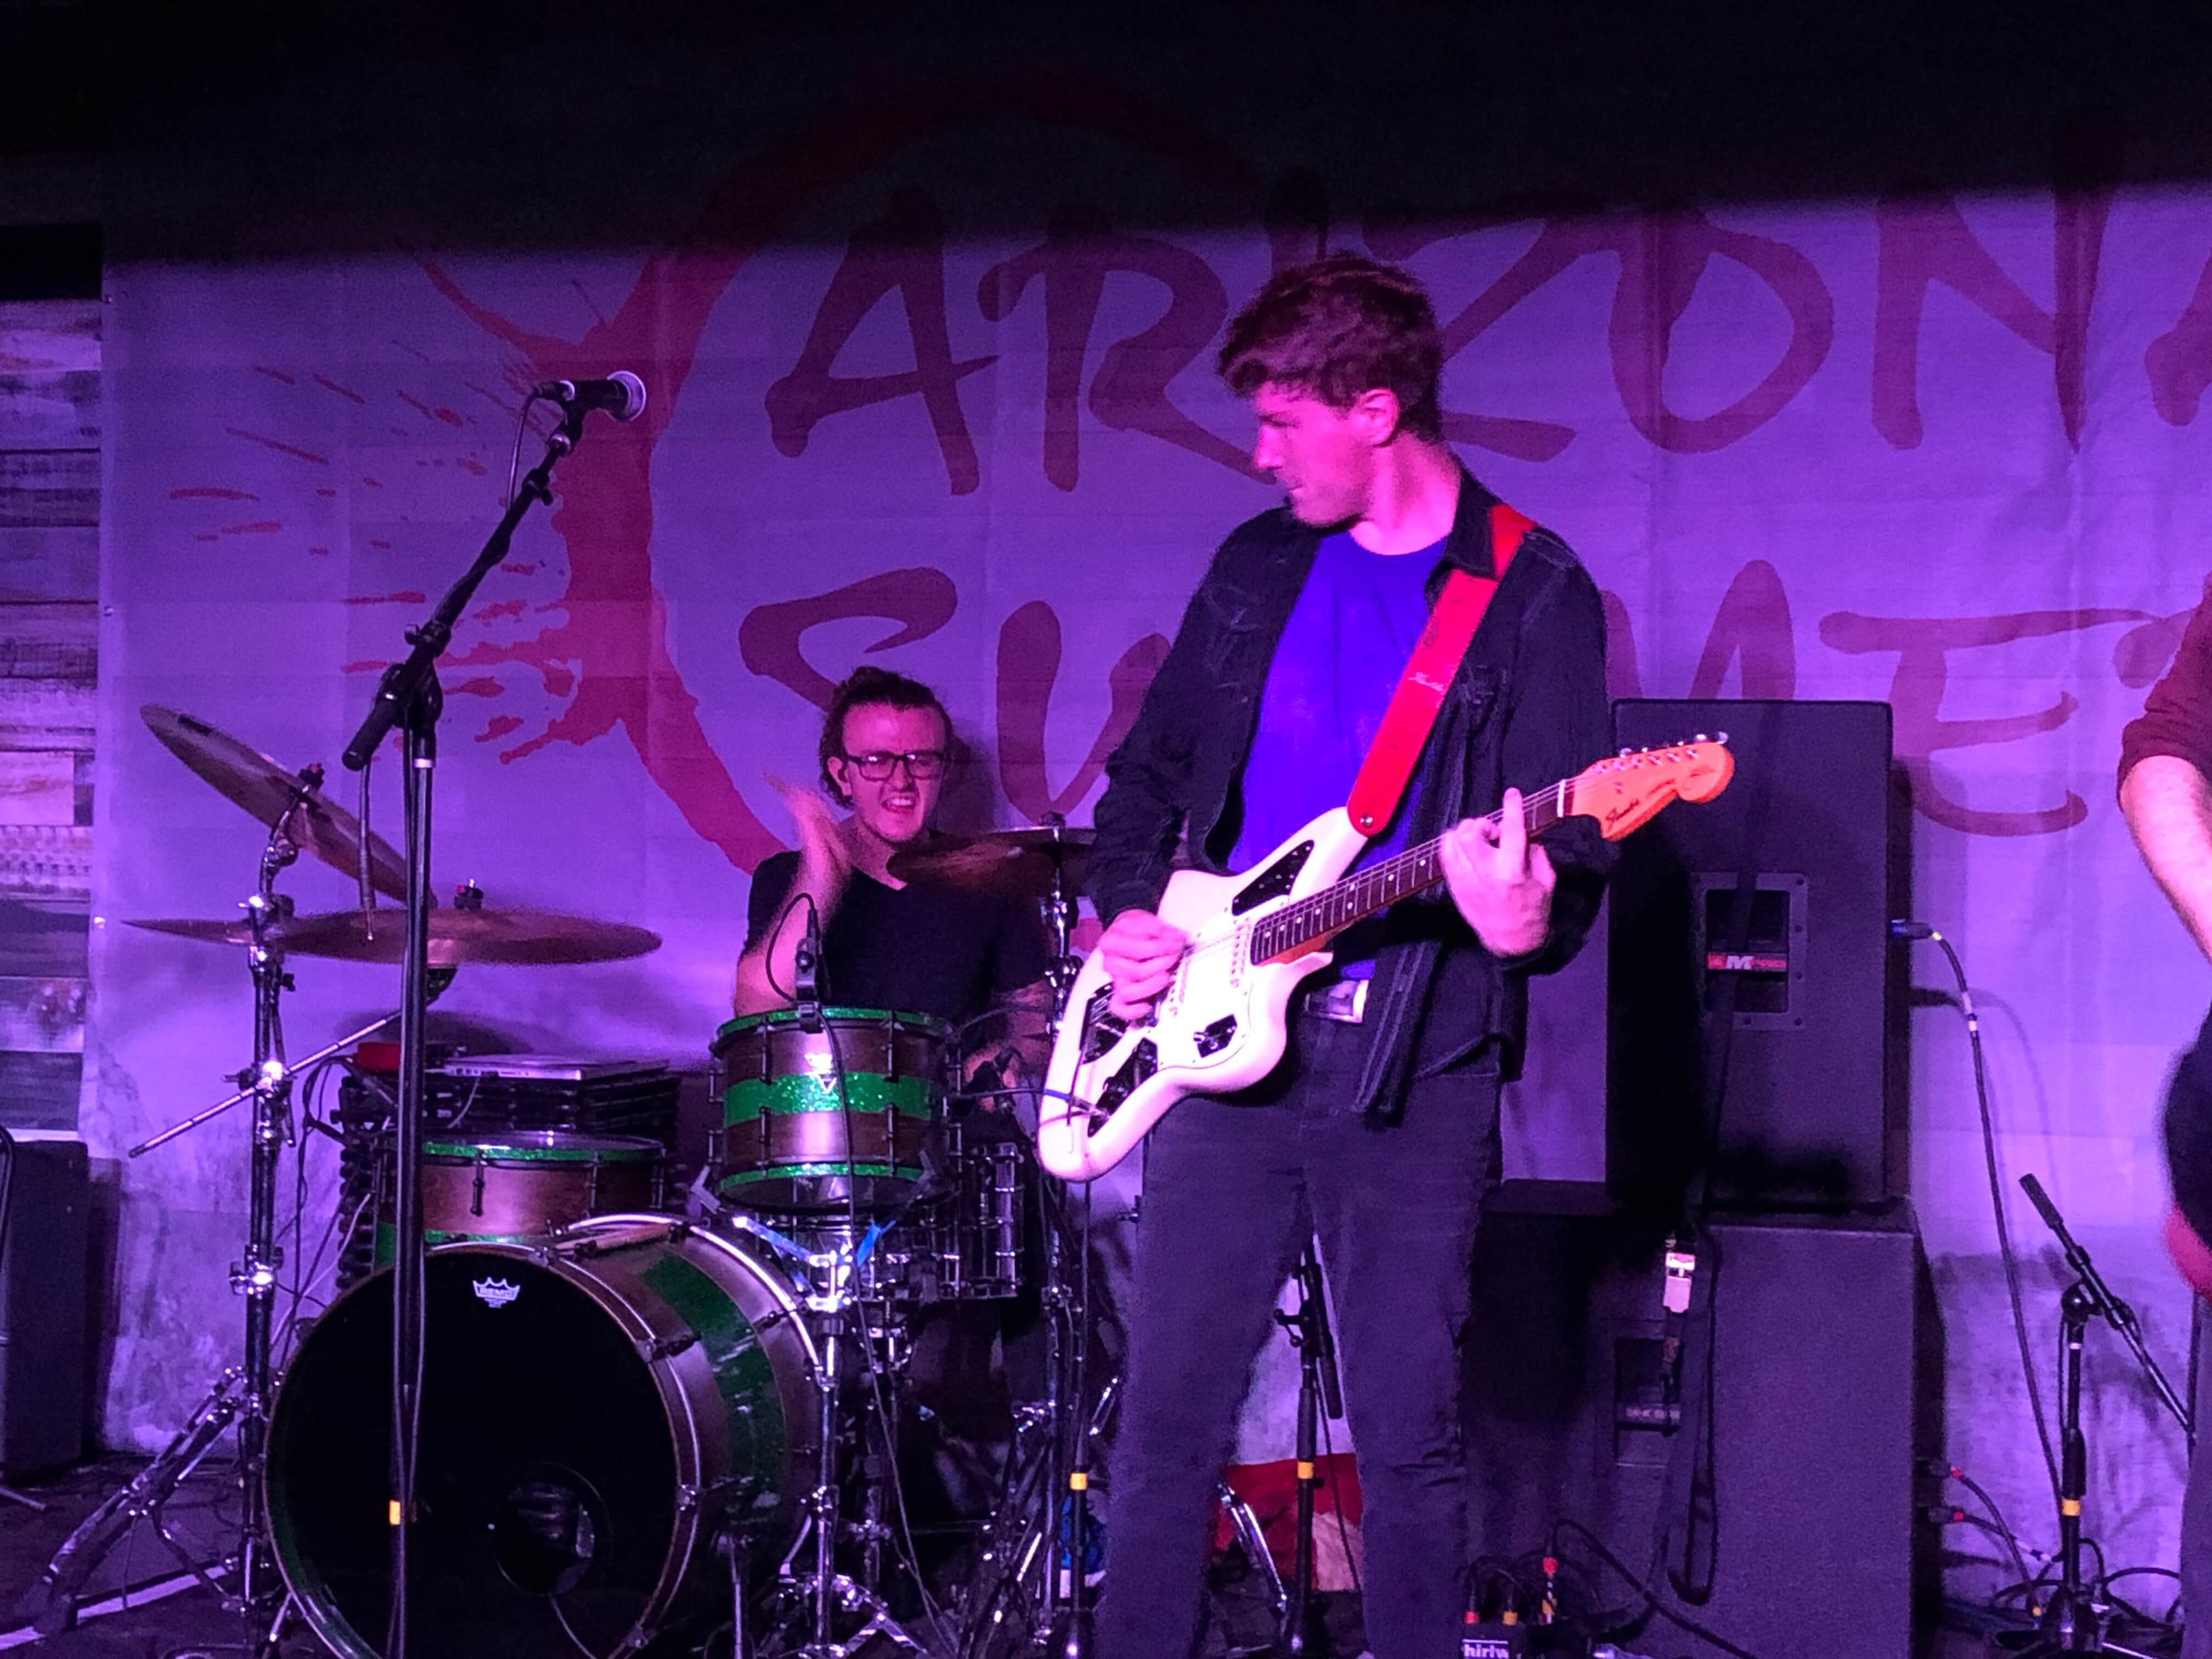 Chris Reiswig on stage in Scottsdale at the Temperatures Rise album debut party